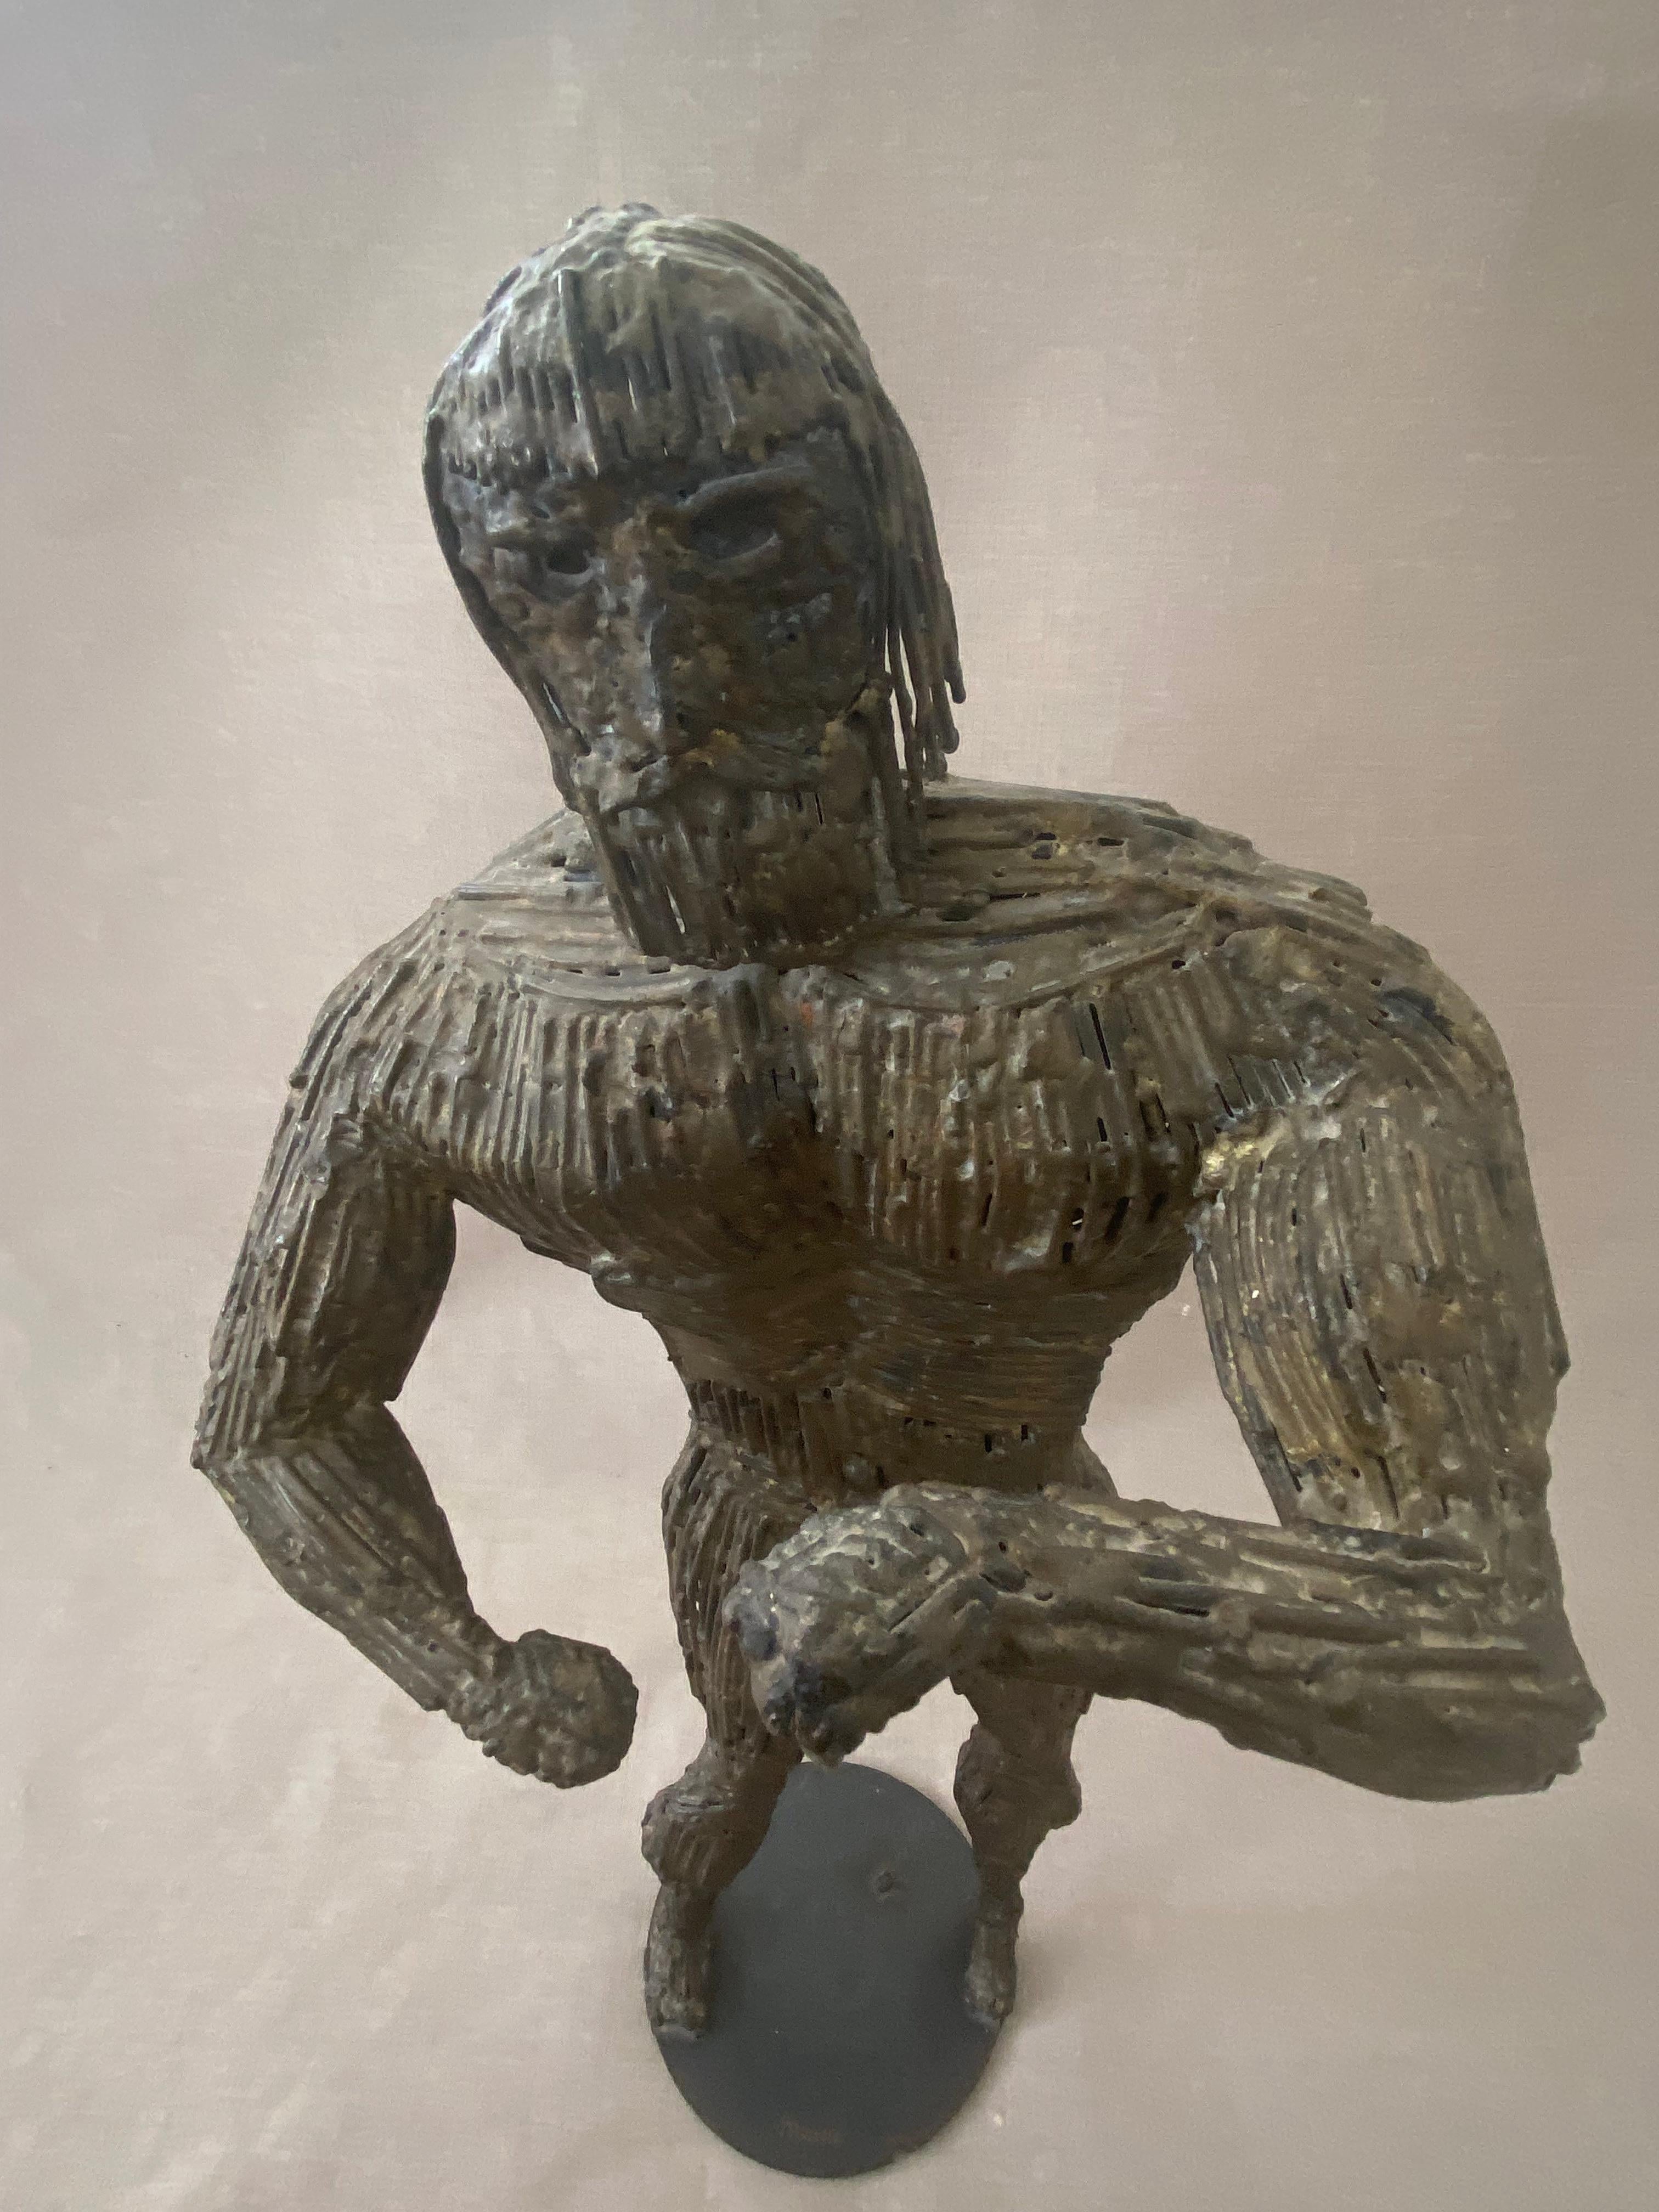 Brutalist sculpture of Hercules by Liza Monk - Los Angeles based WPA artist.
Heavy and welded pieces of metal/ nails.

